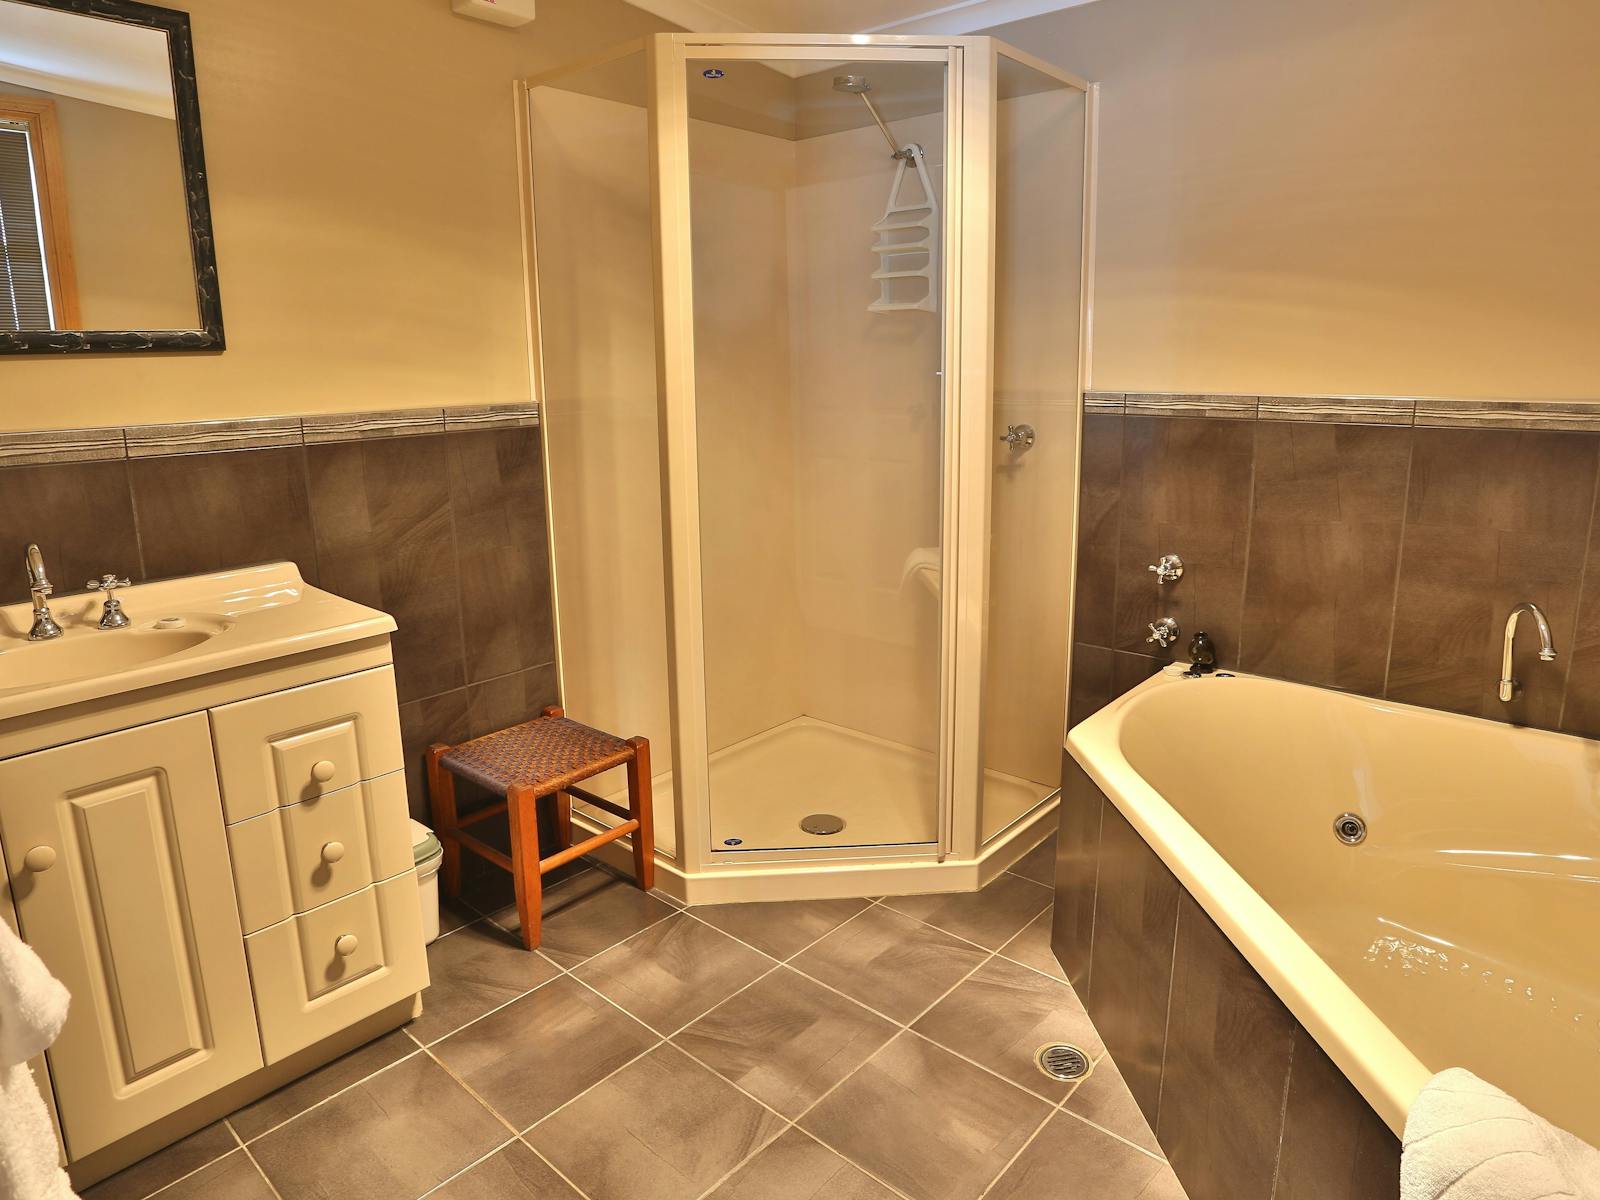 Spacious bathroom with walk in shower, 2 person corner spa